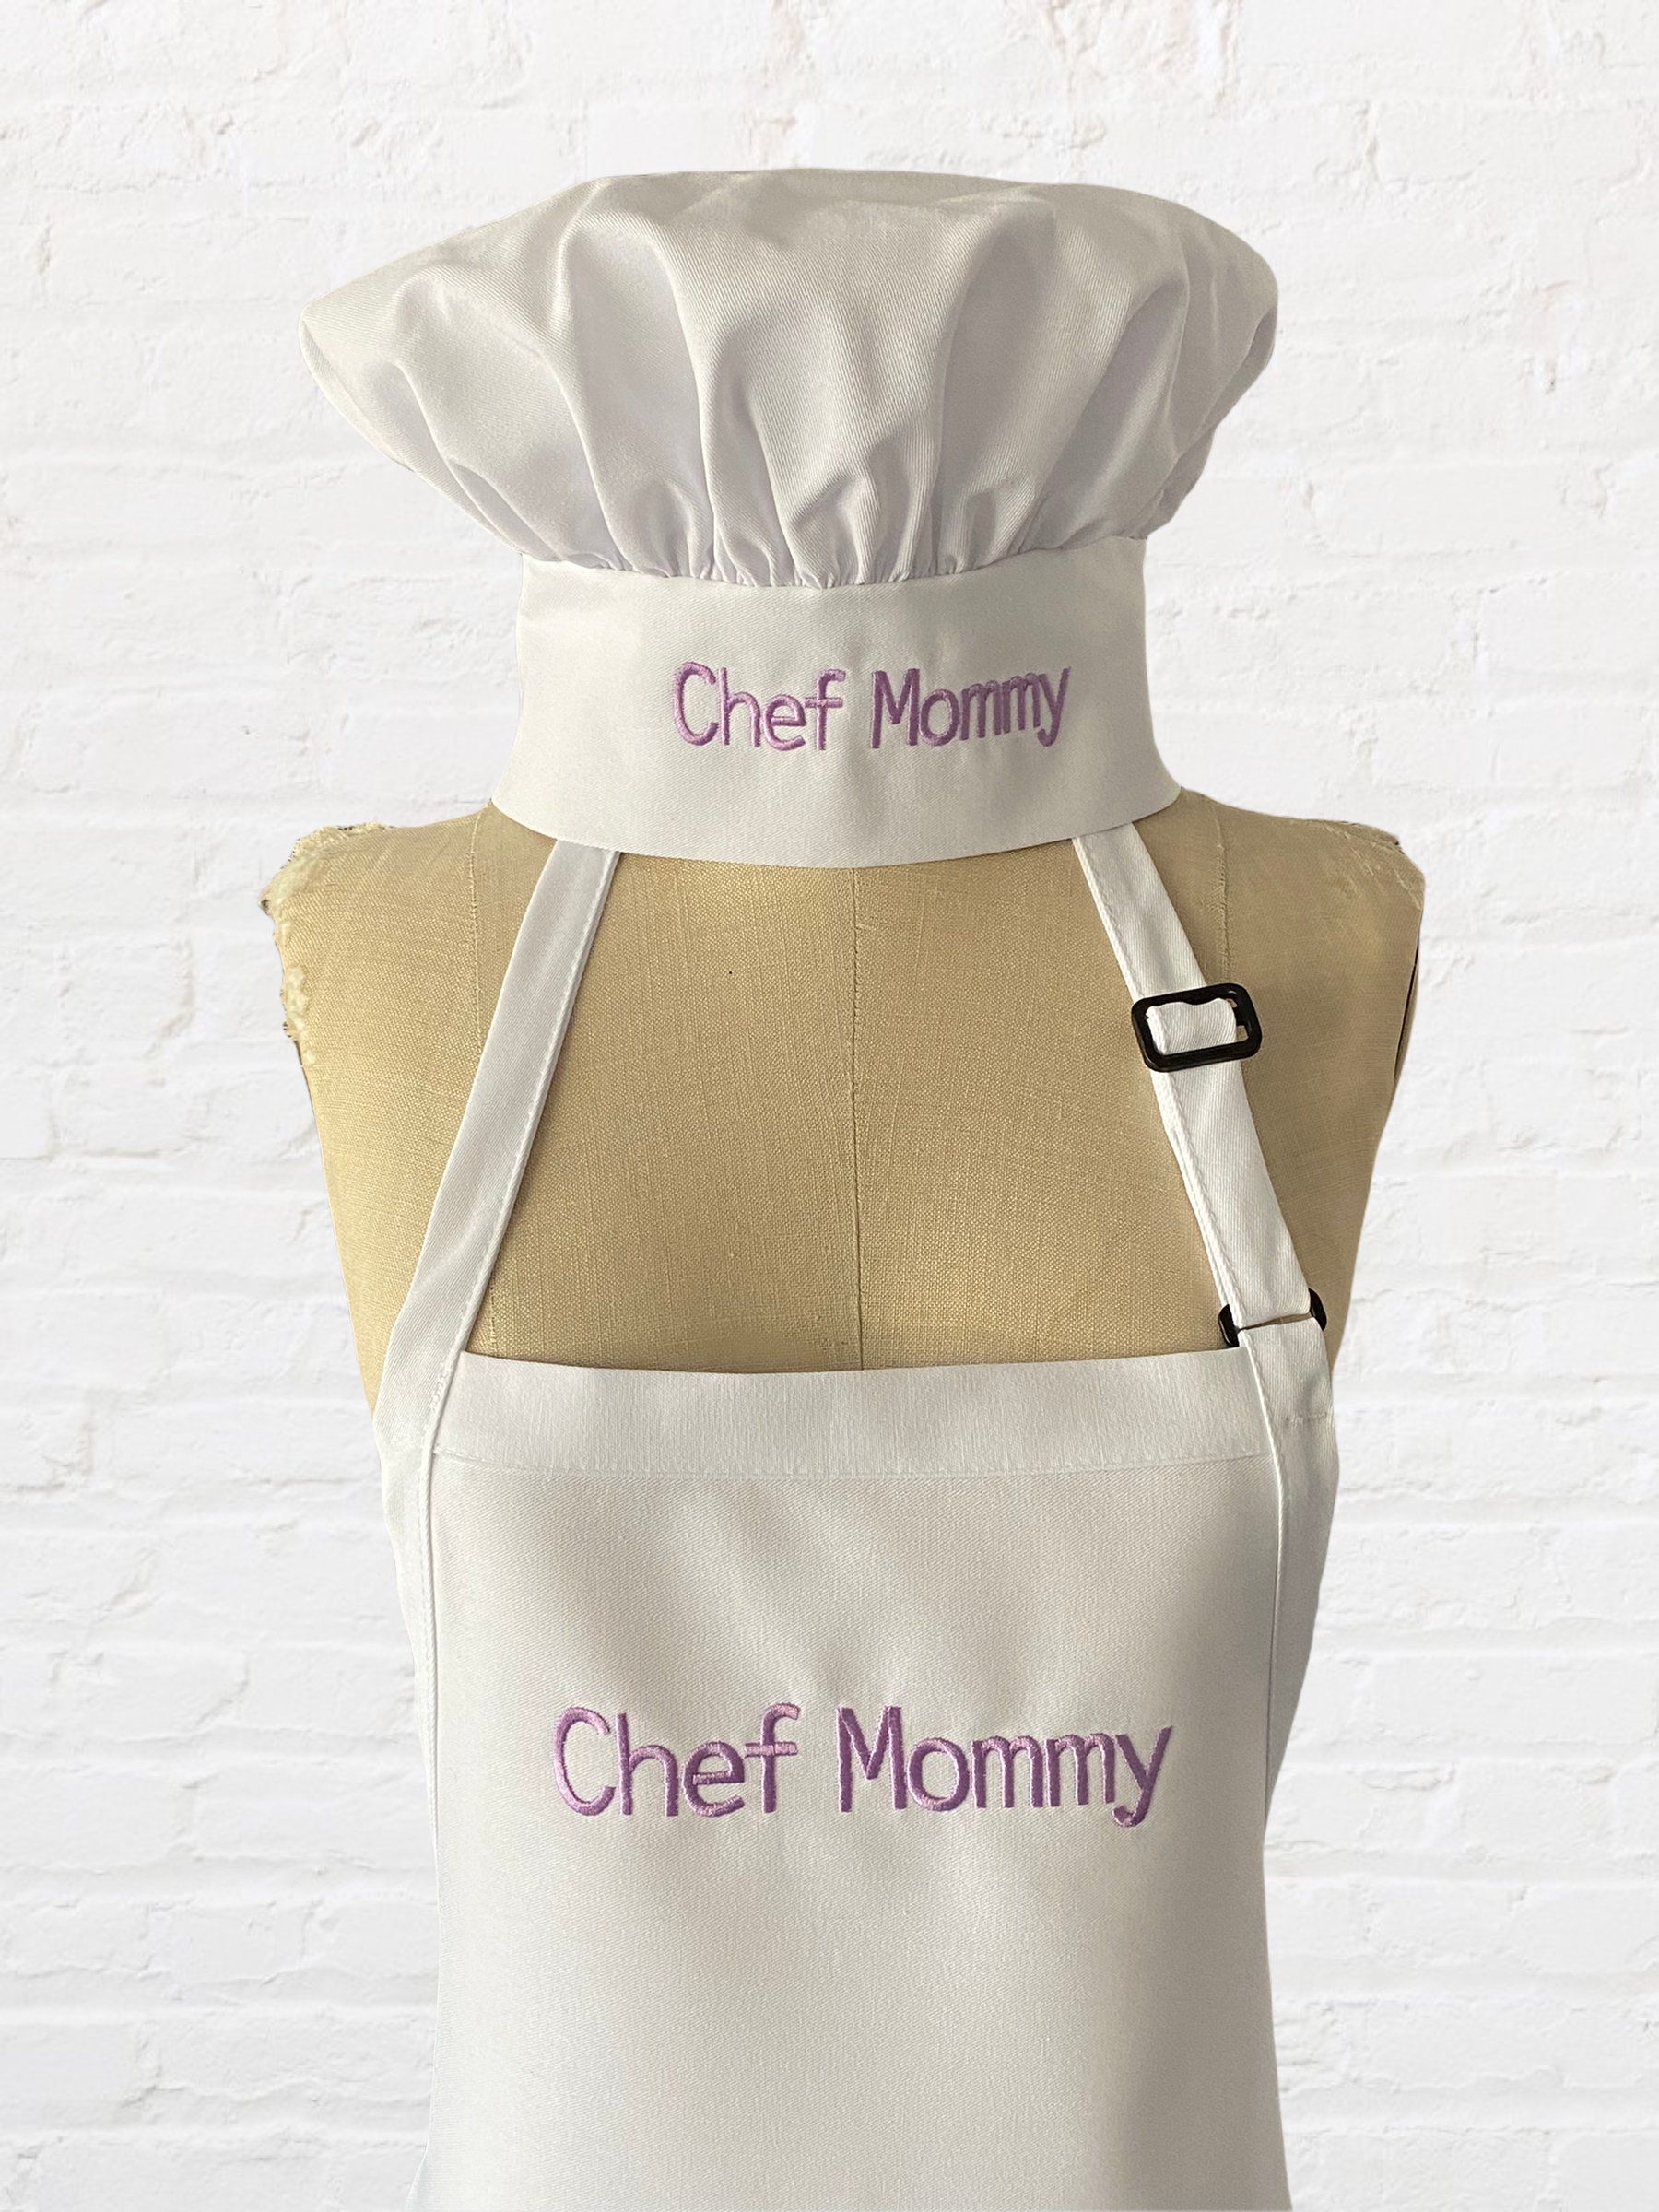 The Loveliest Masterpiece Apron (White)Stay-At-Home Mom Apron (White)